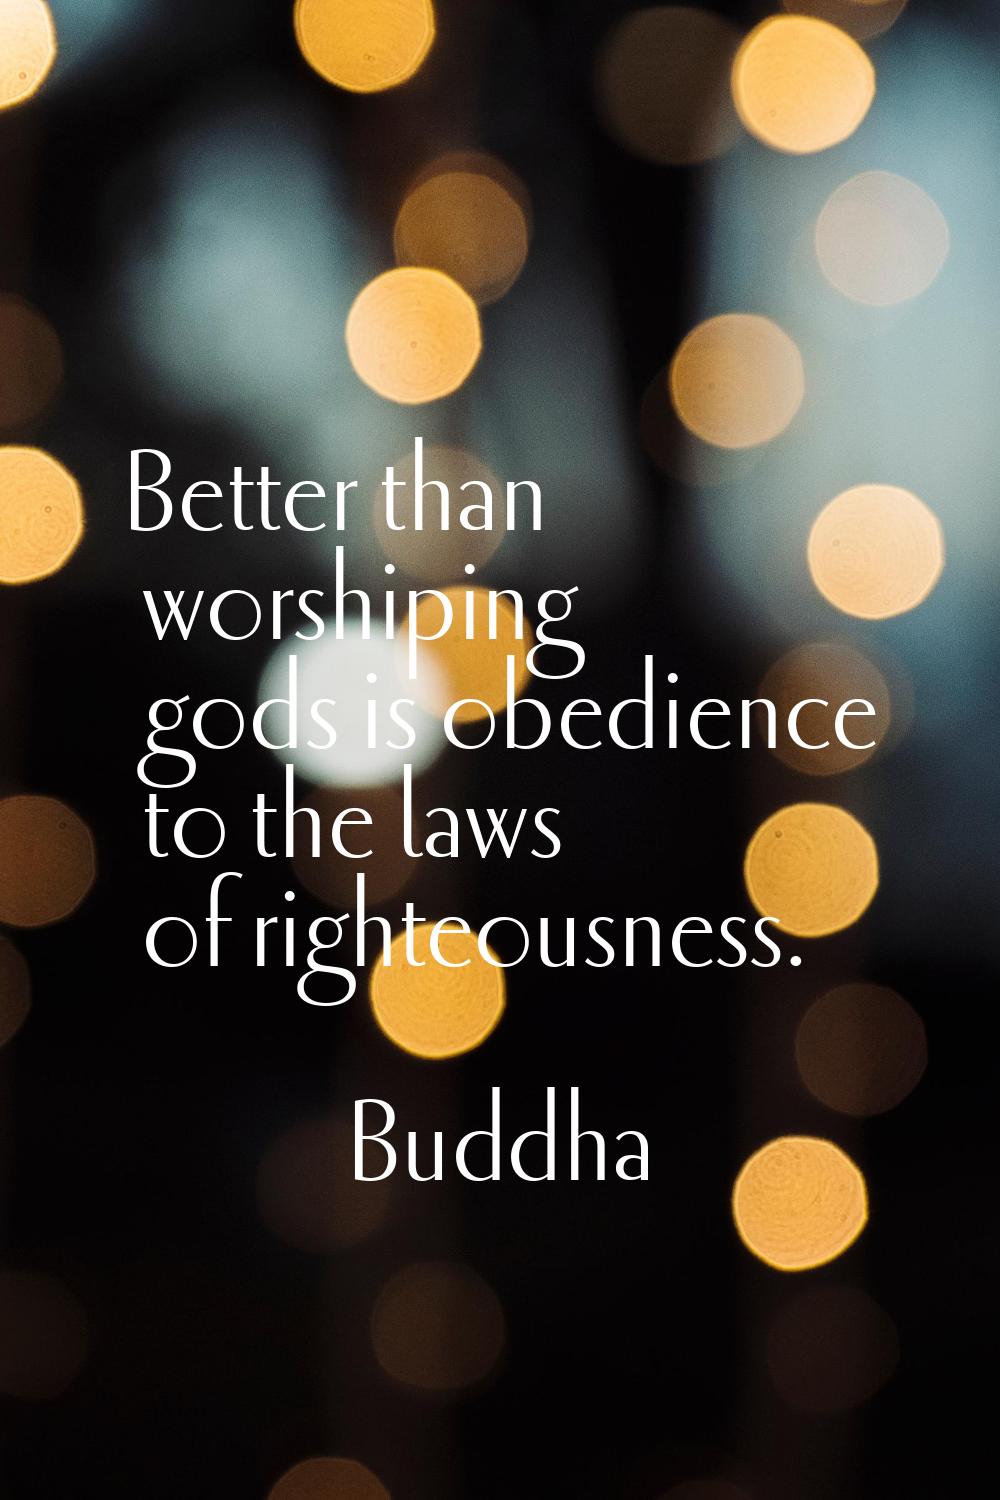 Better than worshiping gods is obedience to the laws of righteousness.